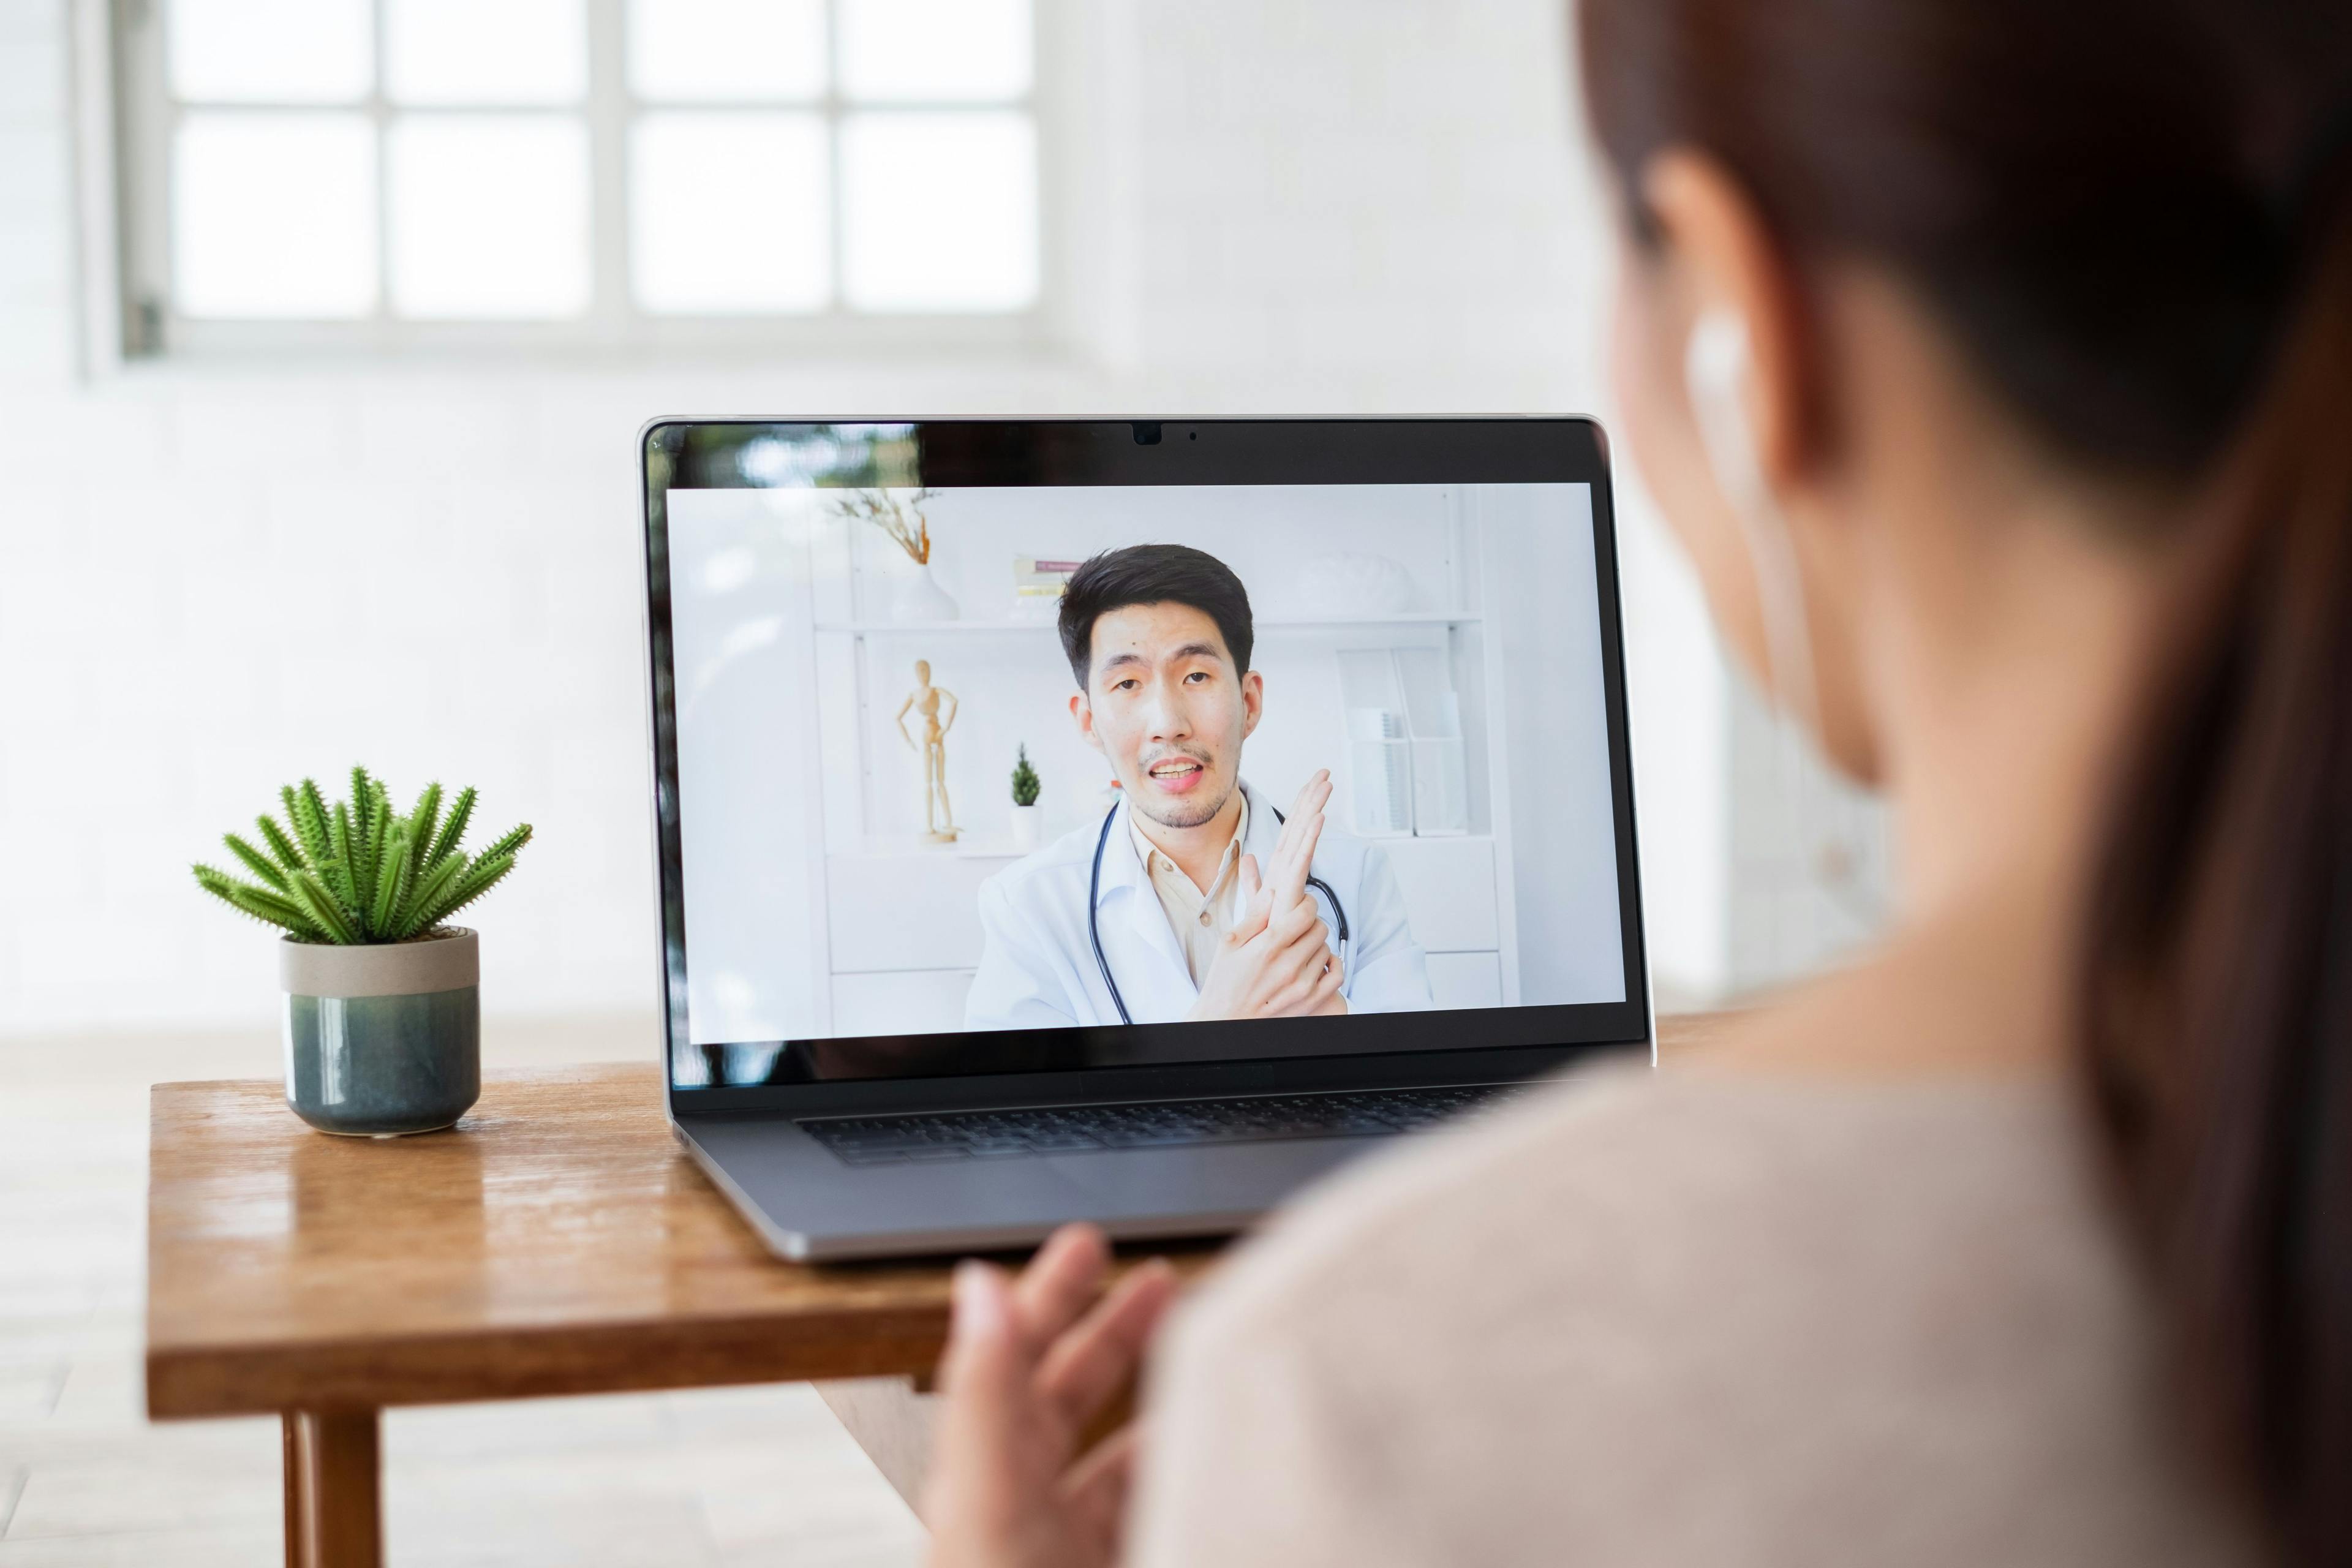 Many telehealth appointments see fewer follow-ups than office visits, study finds